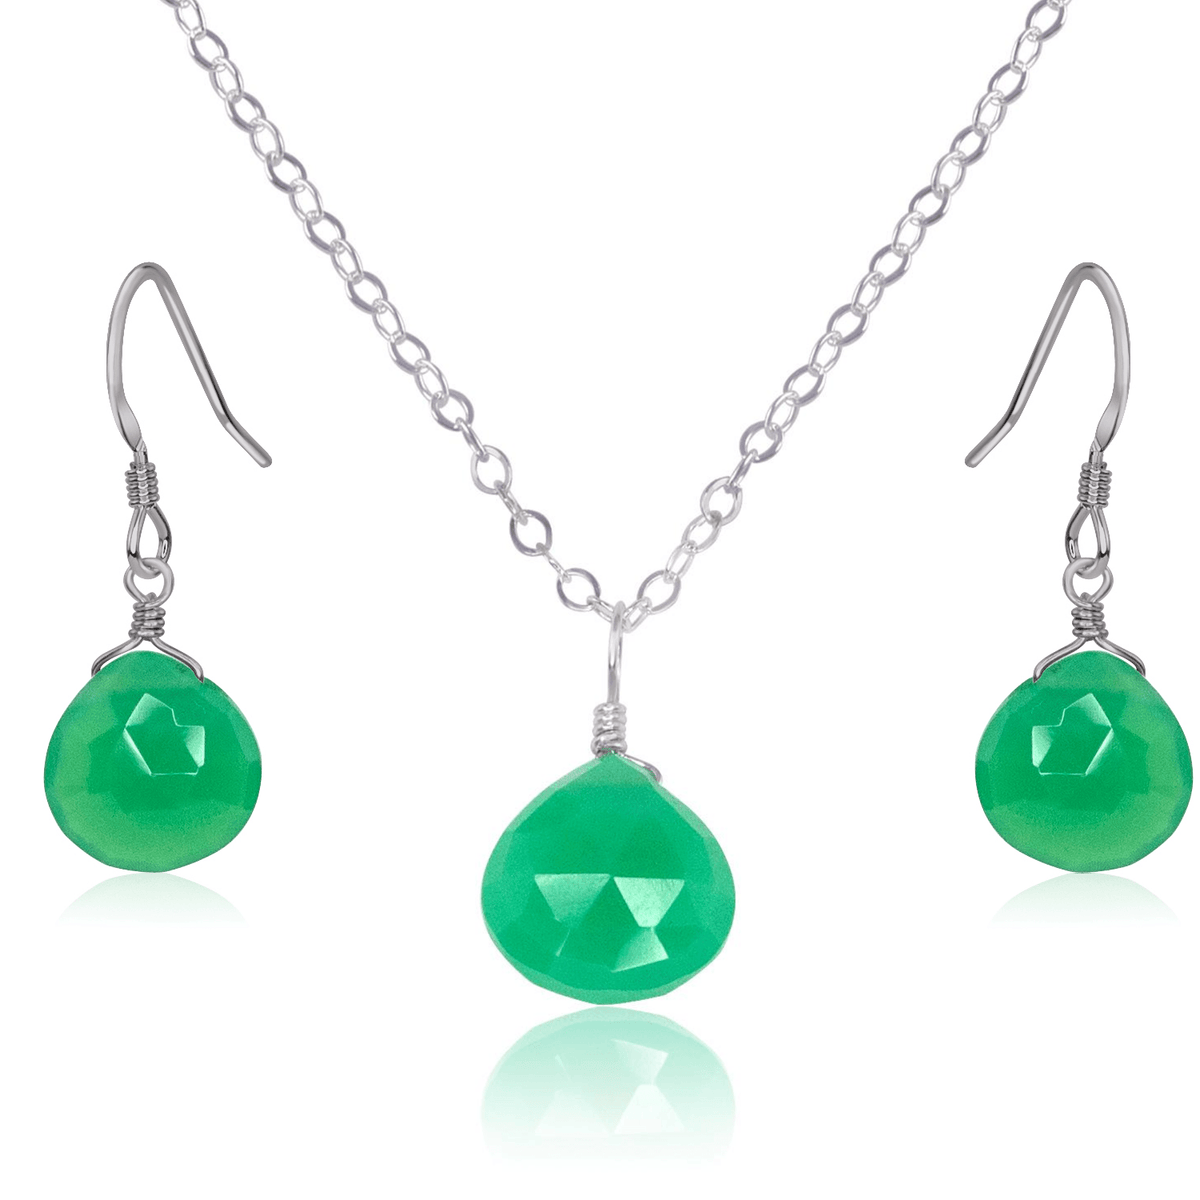 Chrysoprase Tiny Teardrop Earrings & Necklace Set - Chrysoprase Tiny Teardrop Earrings & Necklace Set - Stainless Steel / Cable - Luna Tide Handmade Crystal Jewellery